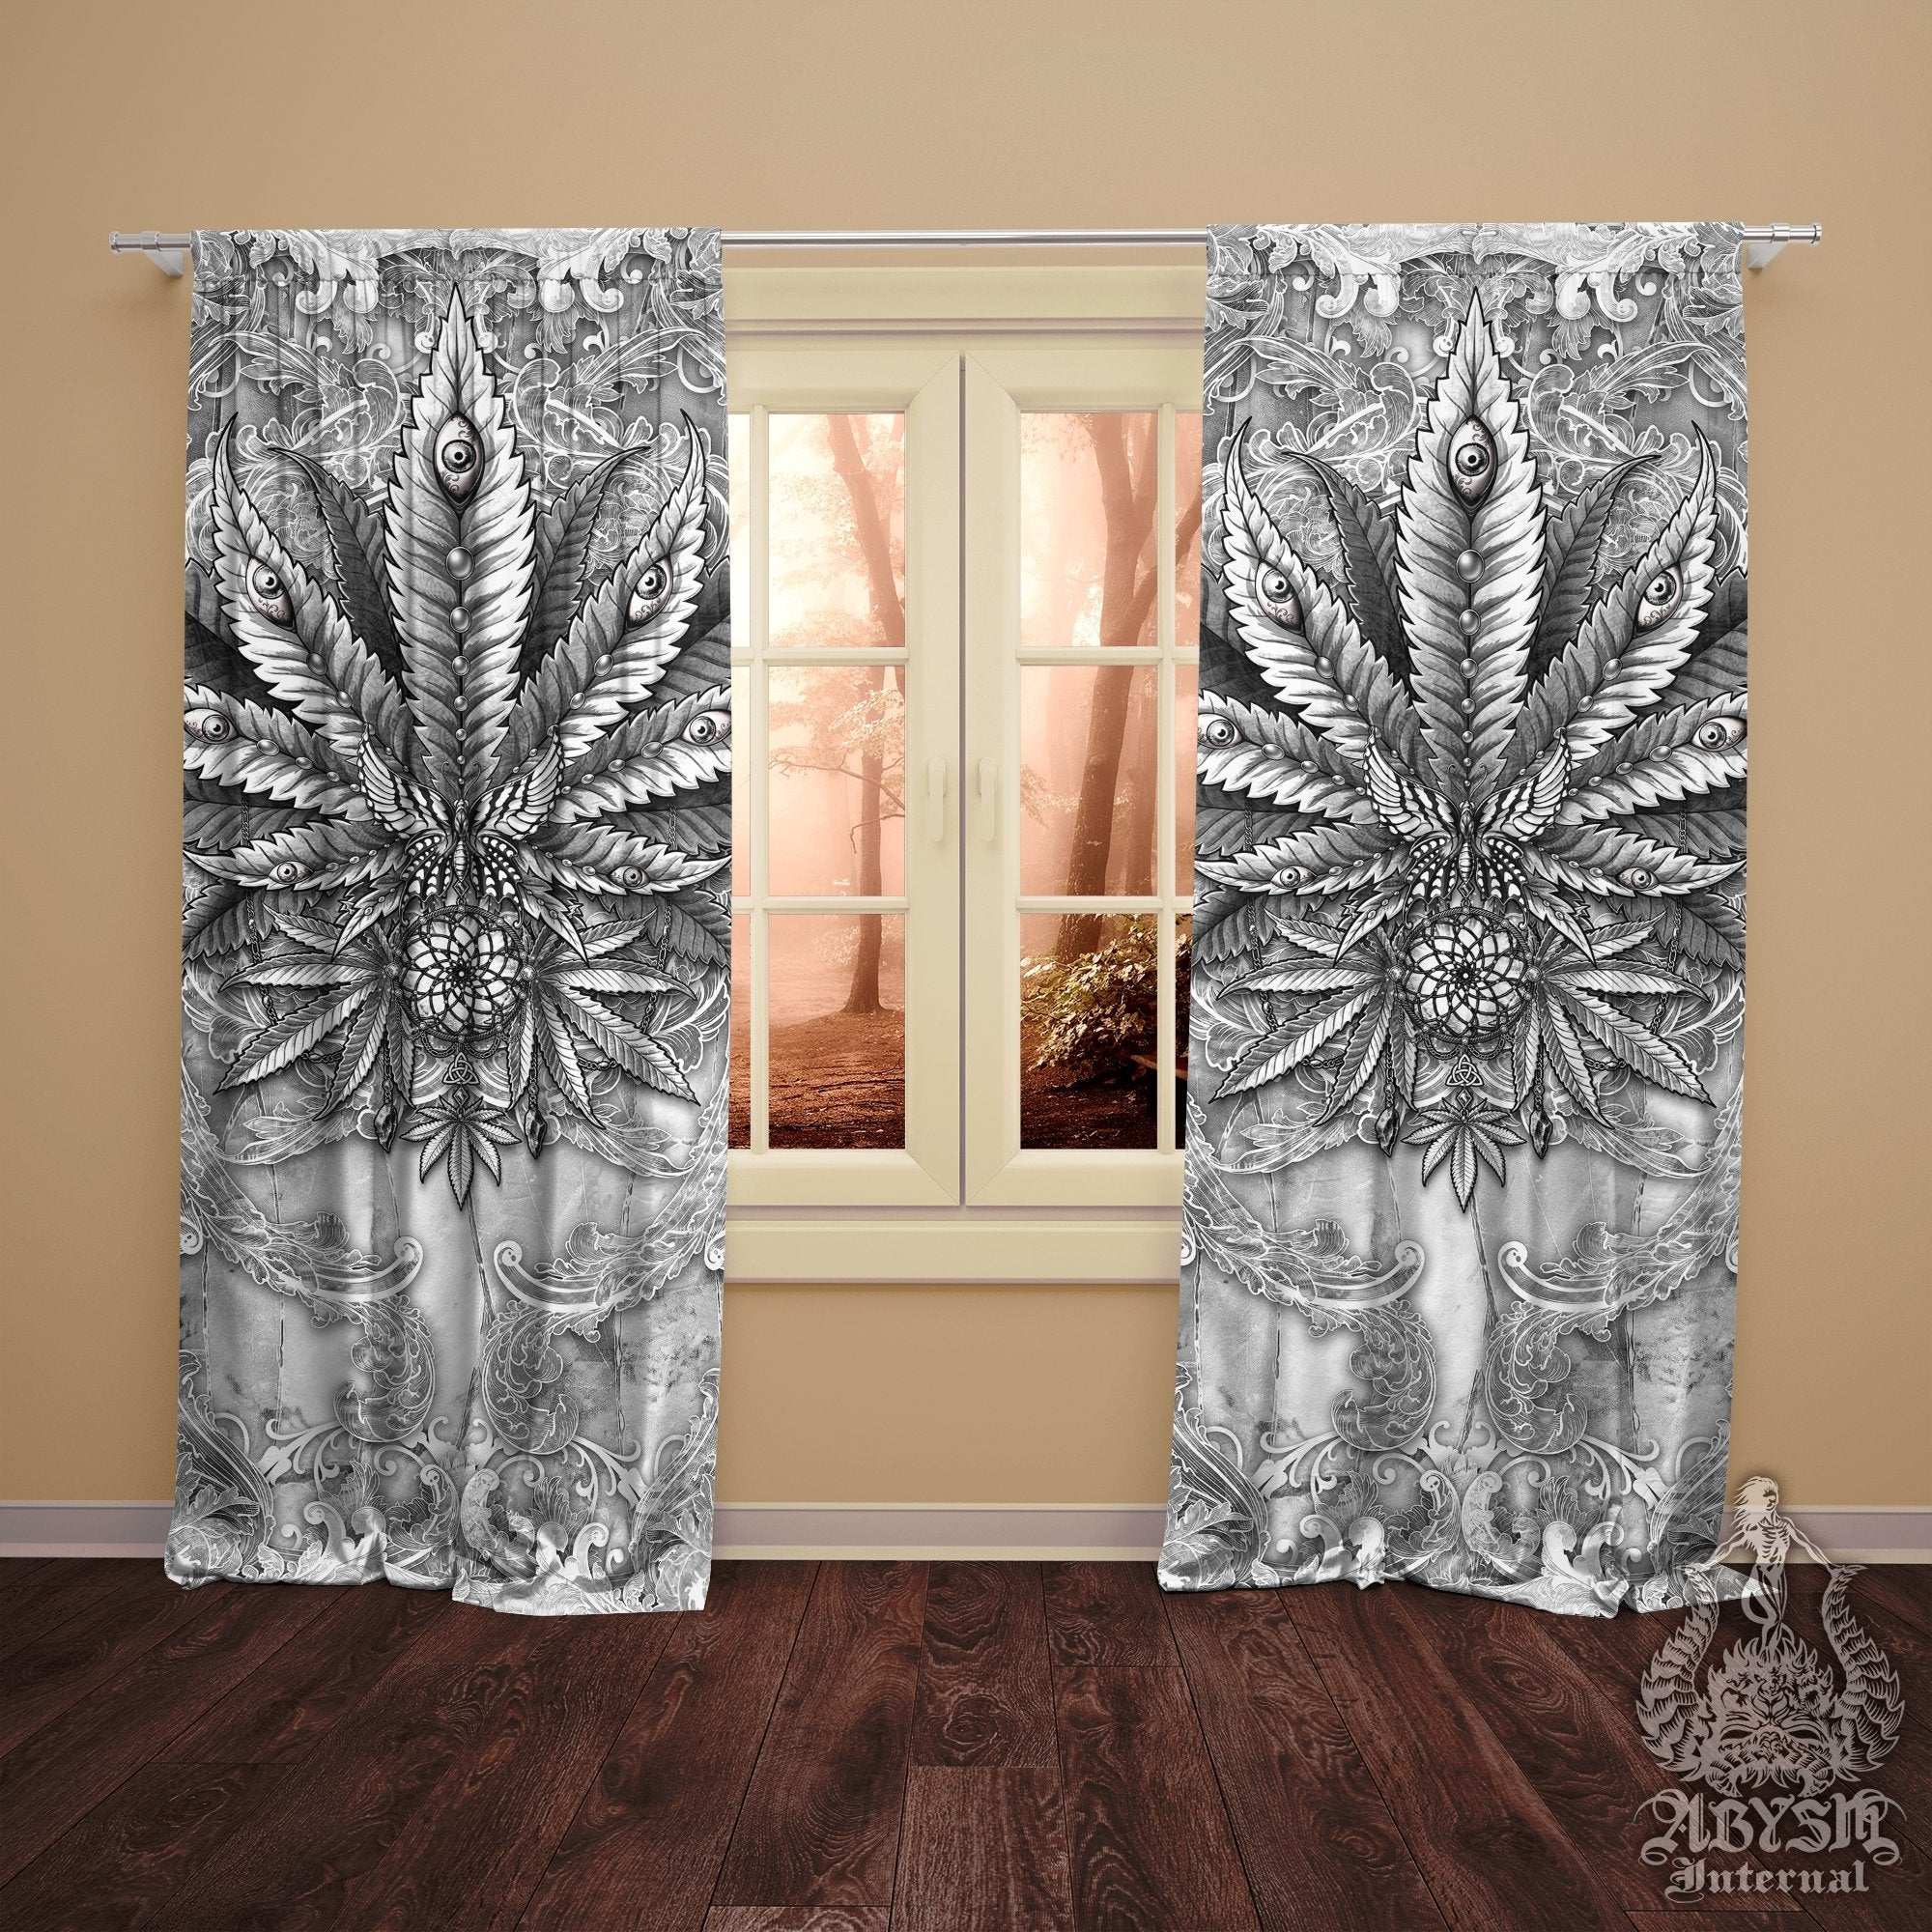 Weed Blackout Curtains, Cannabis Home and Shop Decor, Long Window Panels, Indie 420 Room Art Print - Black and White Goth, Stone - Abysm Internal